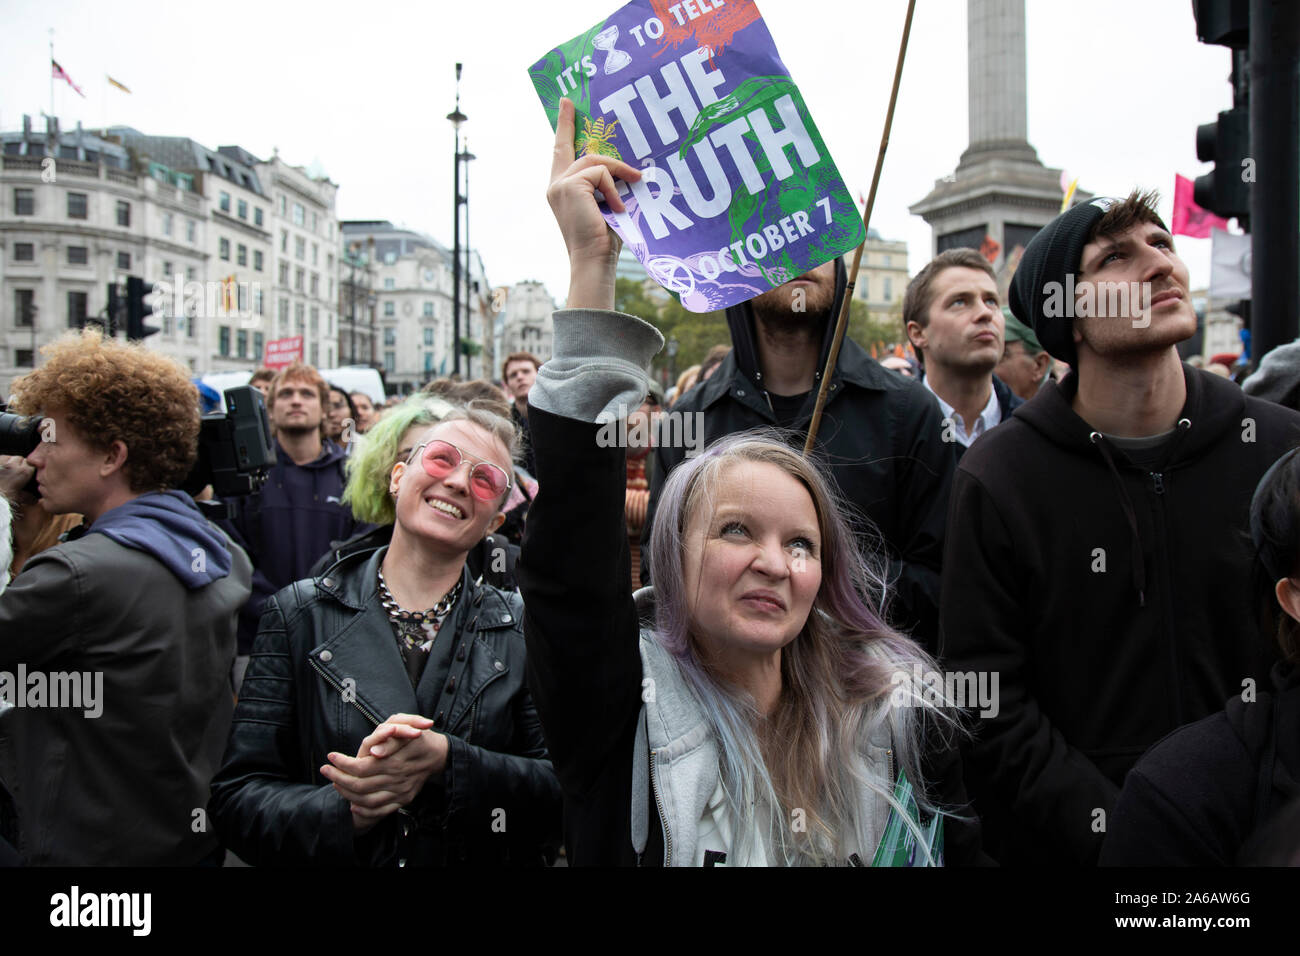 The Penitents Performance Troupe. Sackcloth and Ashes, Extinction  Rebellion Climate Change Protest, Westminster, London. UK Stock Photo -  Alamy